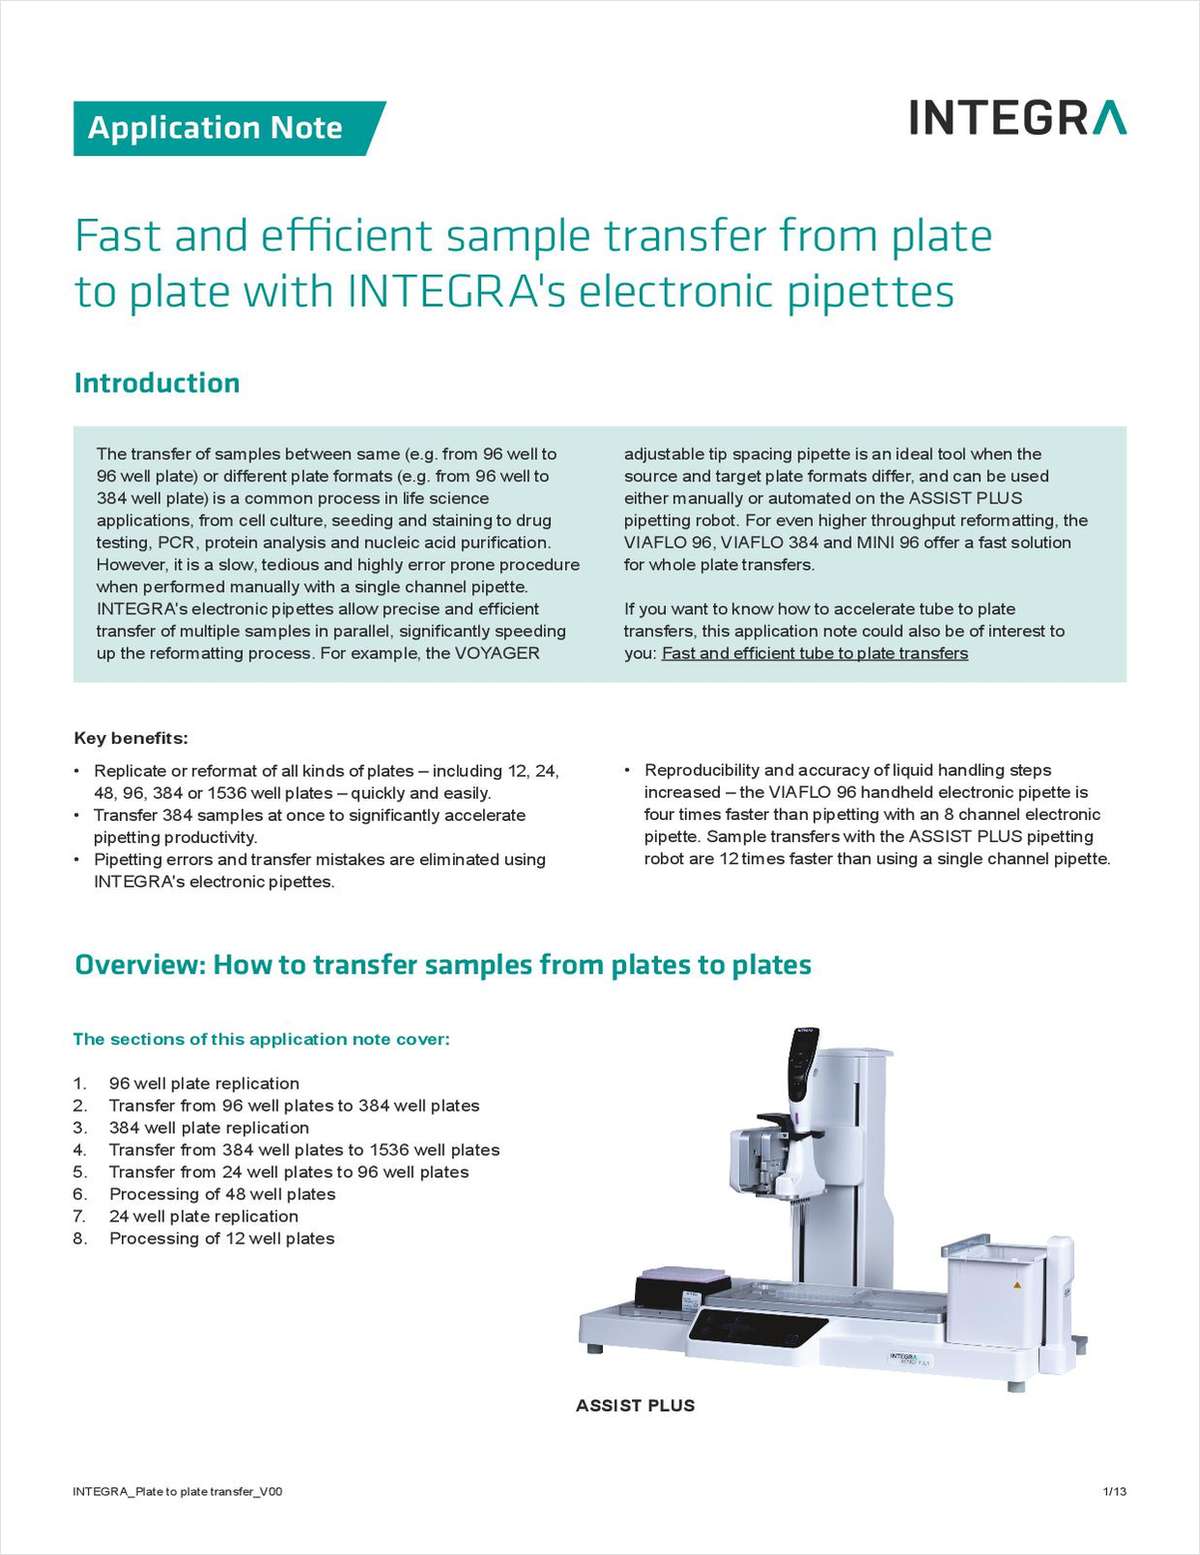 Fast and Efficient Sample Transfer from Plate to Plate with Integra's Electronic Pipettes